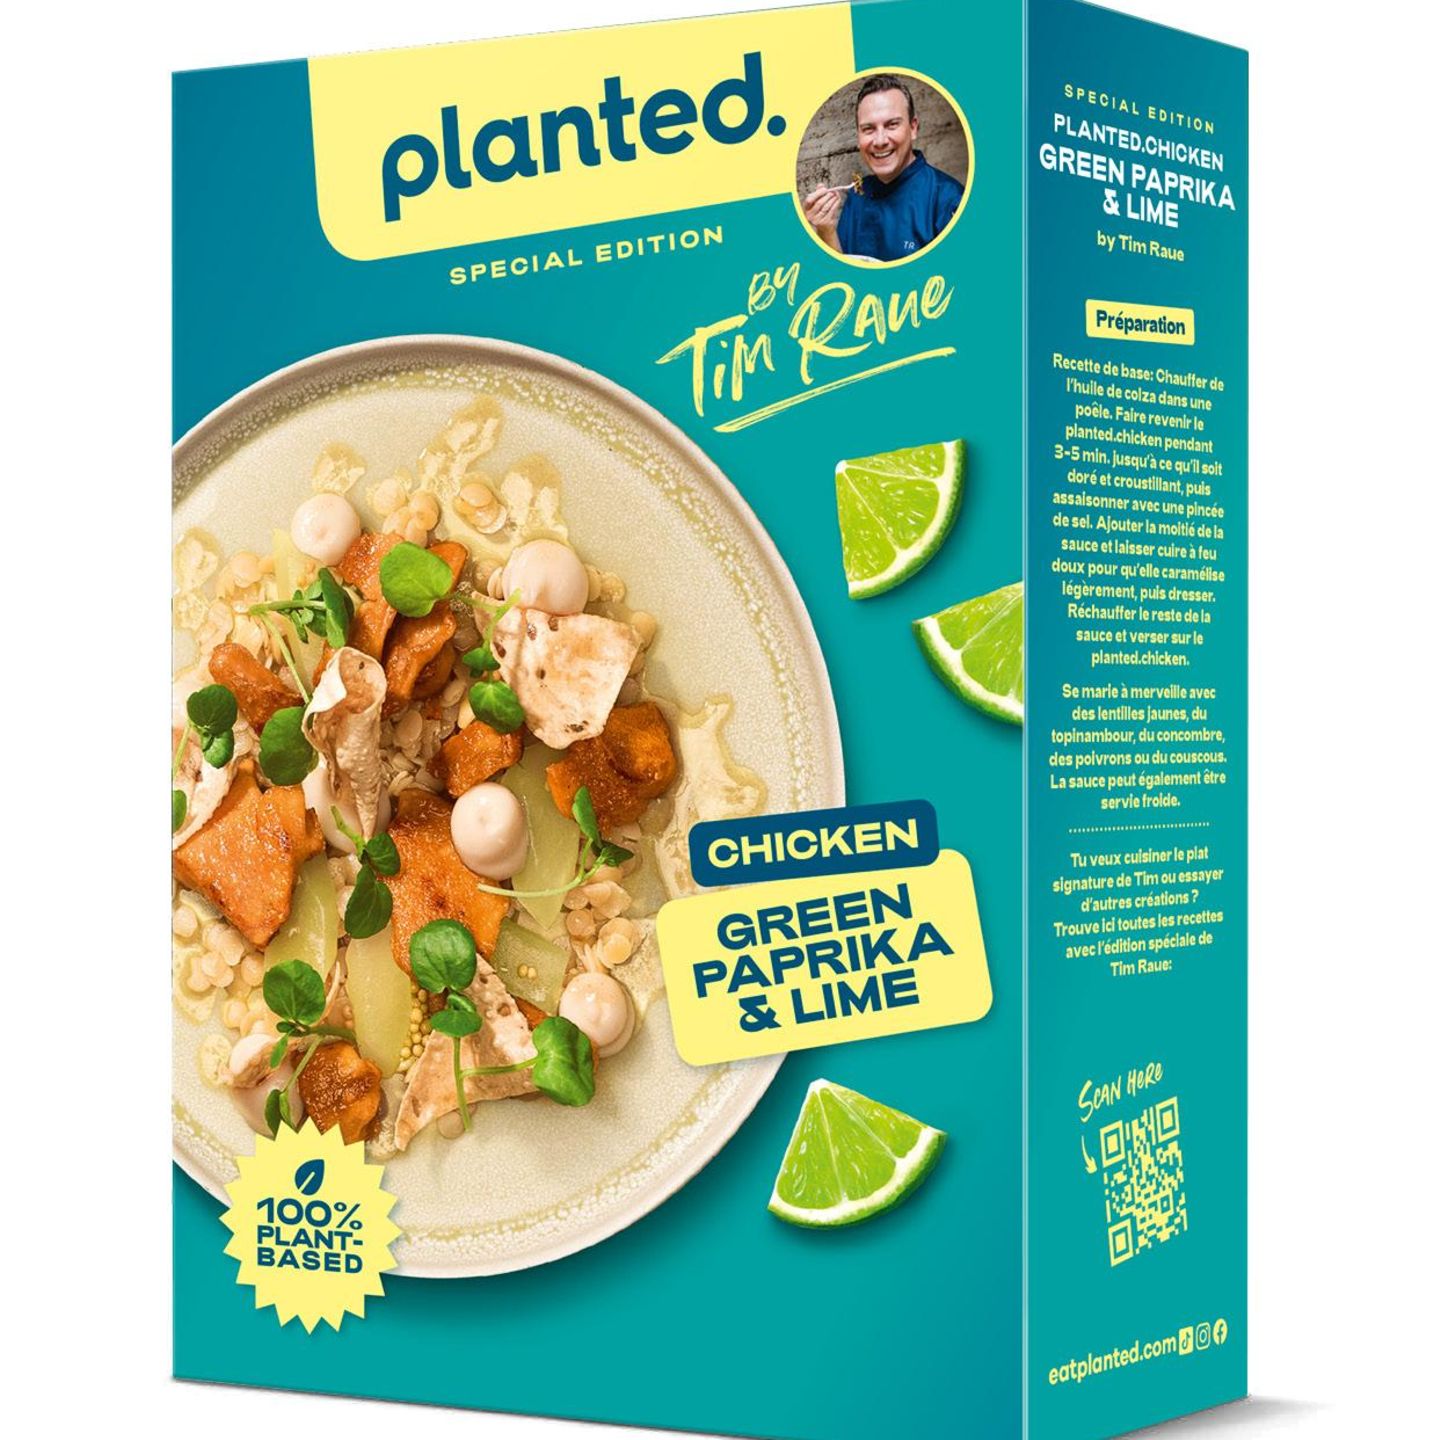 planted.chicken „Green Paprika & Lime“ by Tim Raue